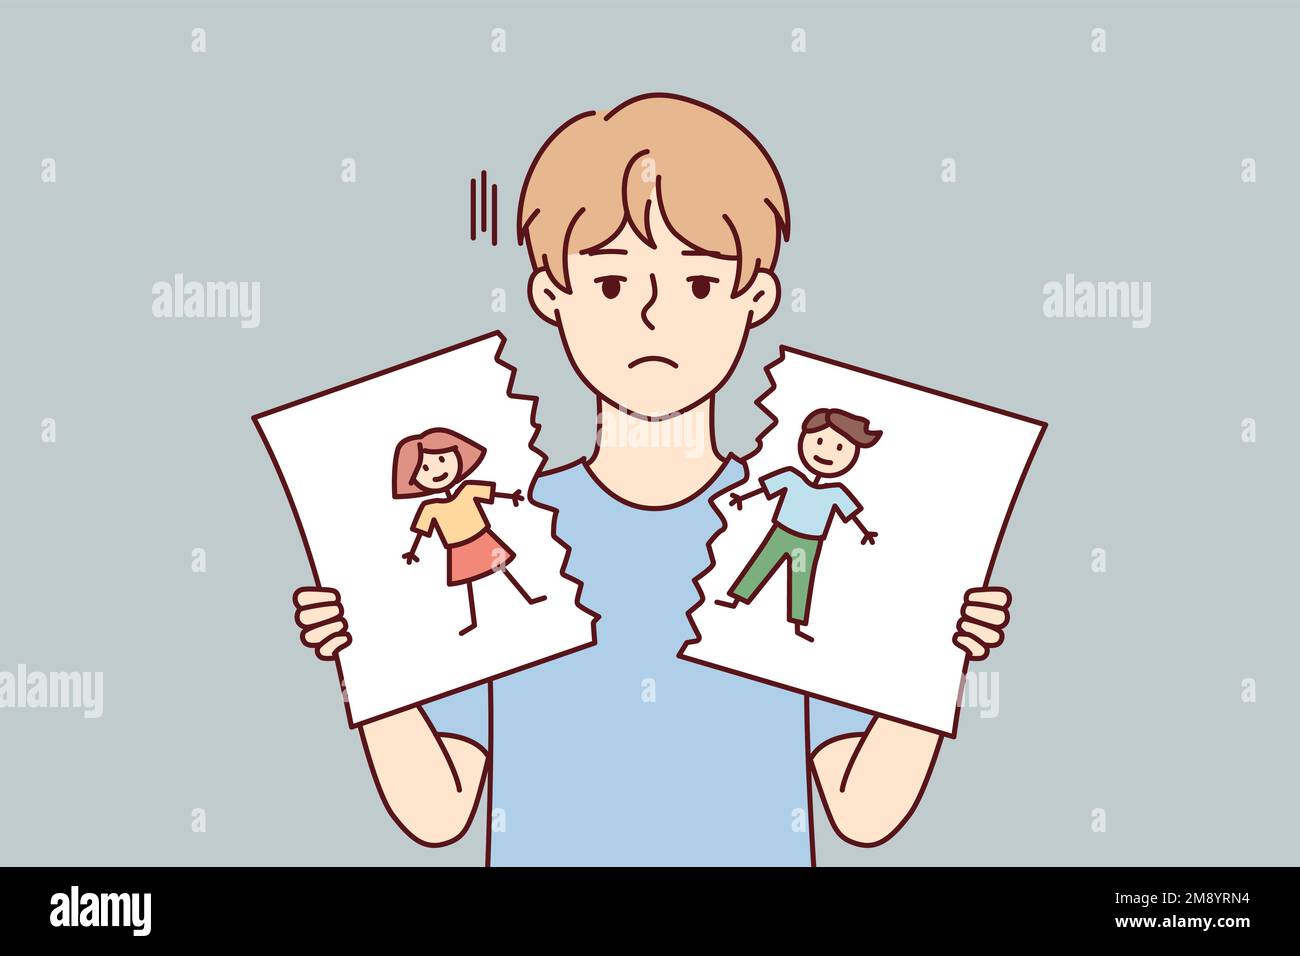 Sad boy with blond hair holds in hands torn pictured with painted kids. Cheerless child of pree teen age after school quarrel or conflict tears up self-drawn portrait. Flat vector design  Stock Vector